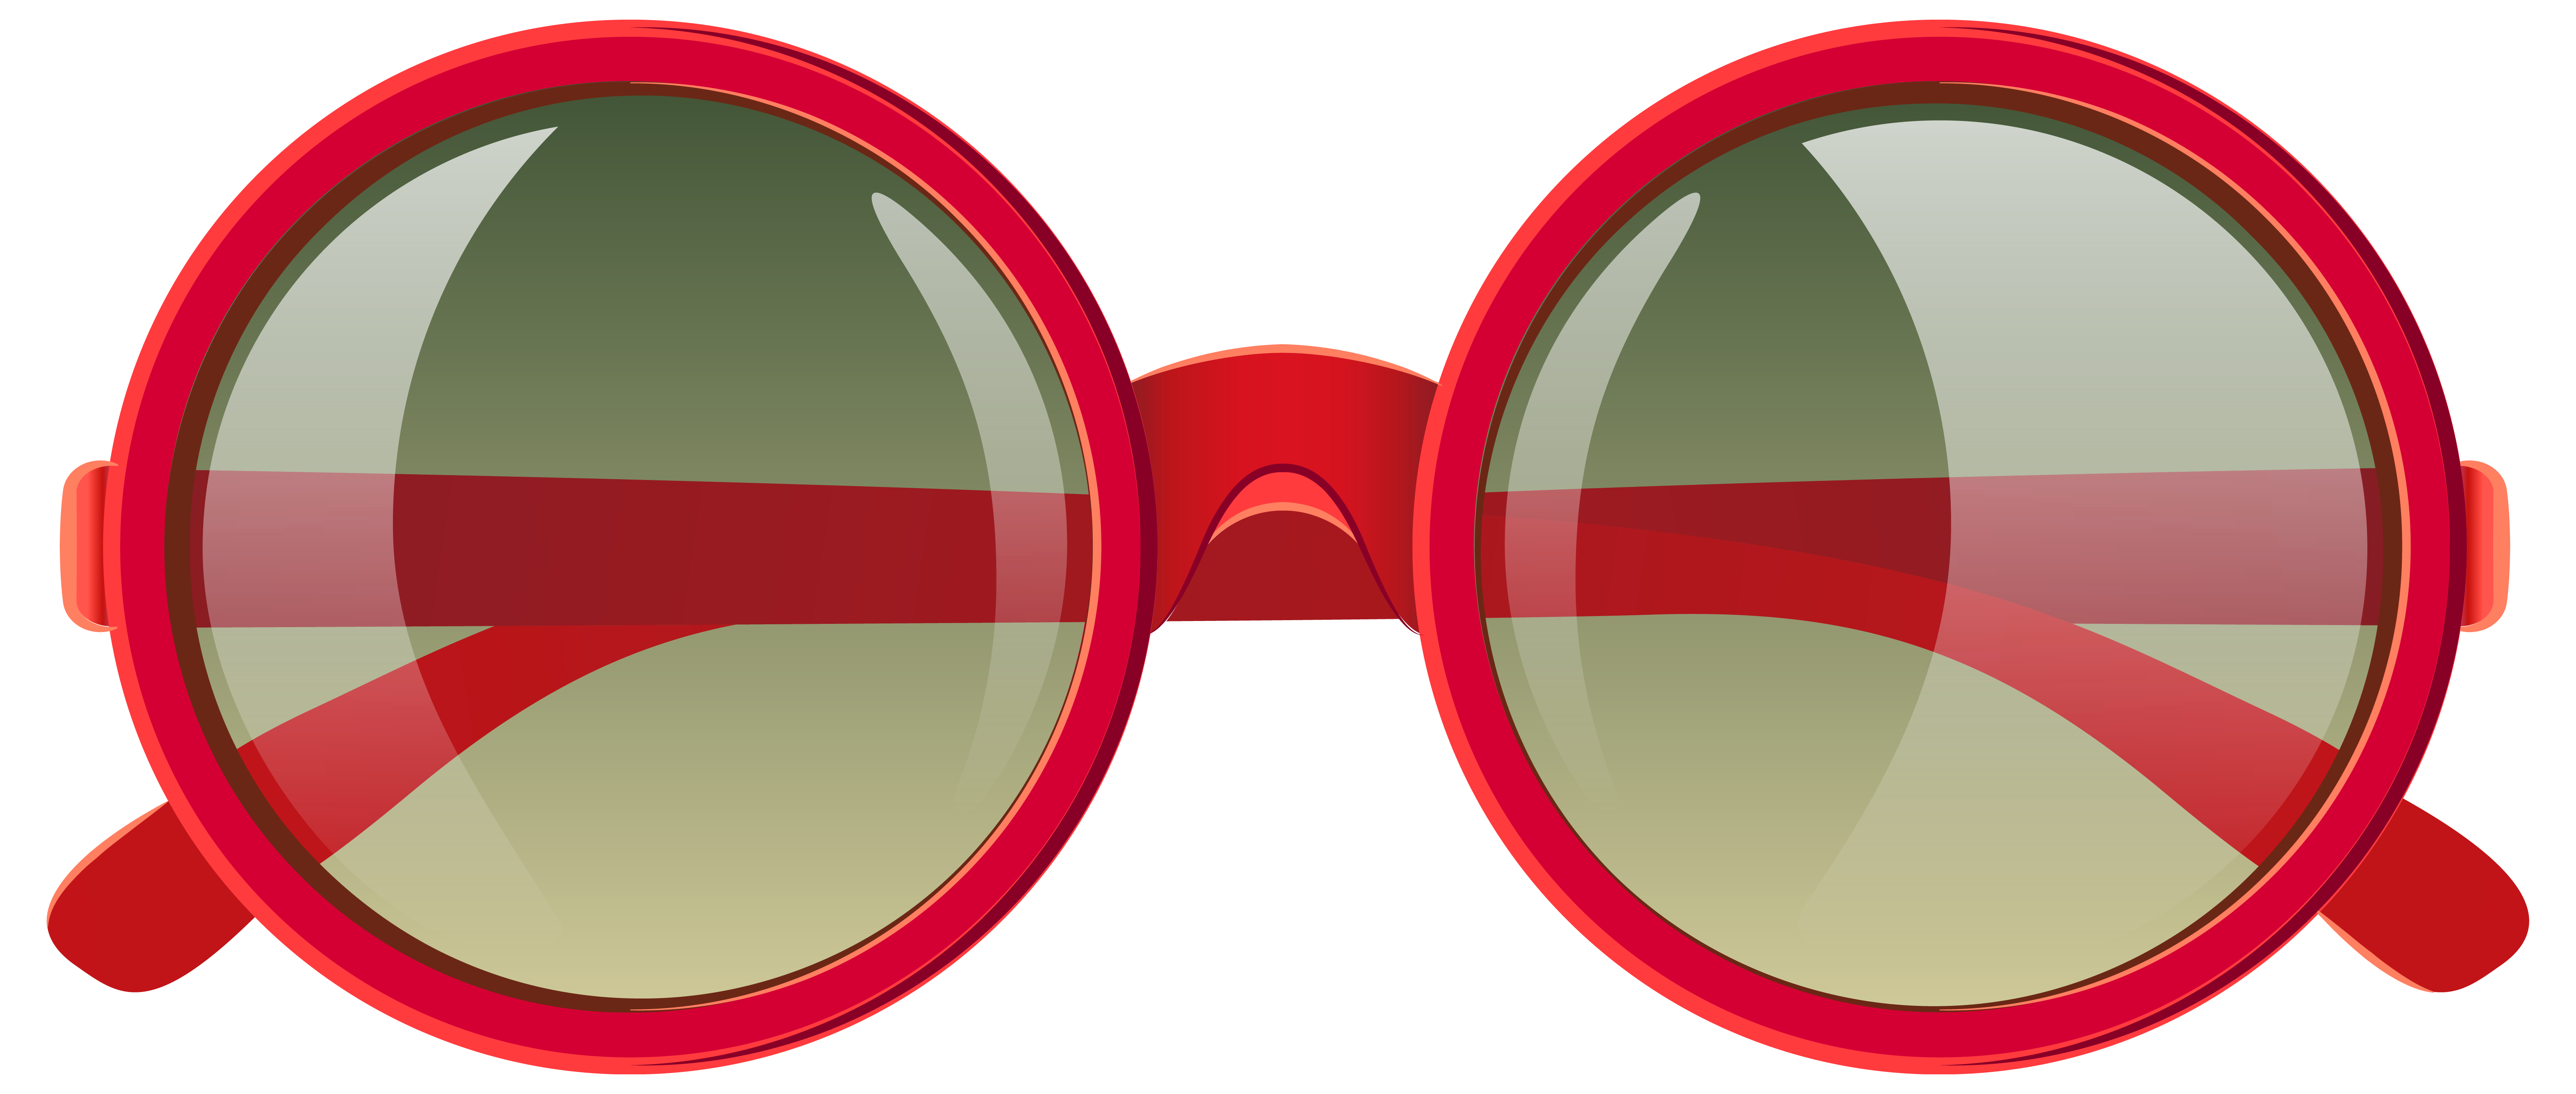 Sunglasses clipart breakfast at tiffany's. Cute red png image